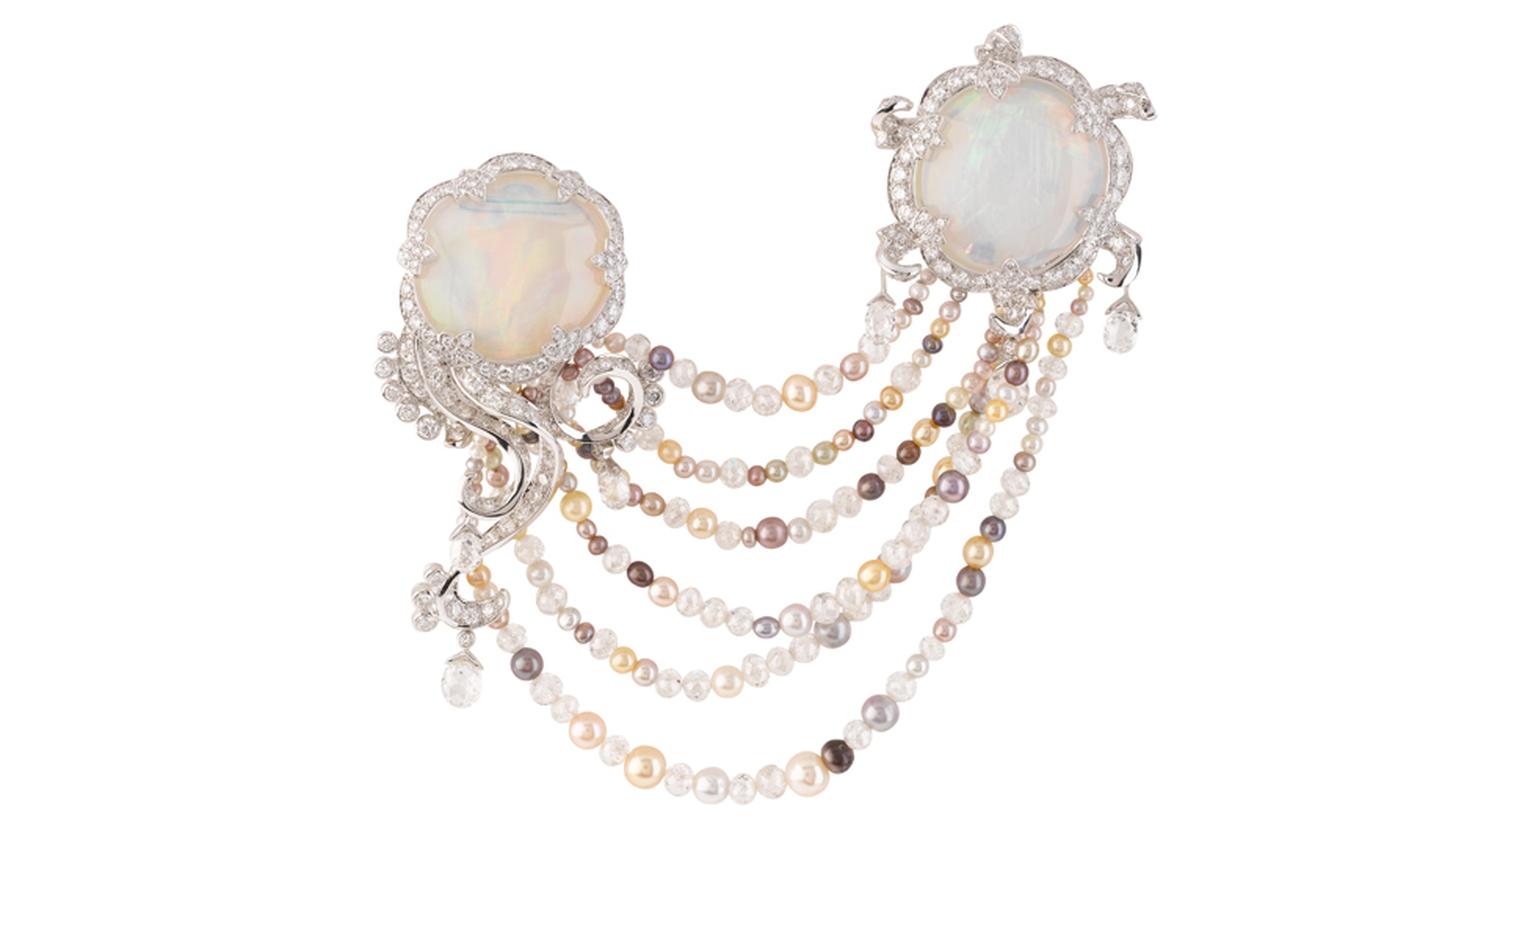 VAN CLEEF & ARPELS. Méduse Lune Clip, Les Voyages Extraordinaires High Jewellery Collection, white gold, round and briolette-cut diamonds, multi-coloured natural pearls, 2 white opals. POA